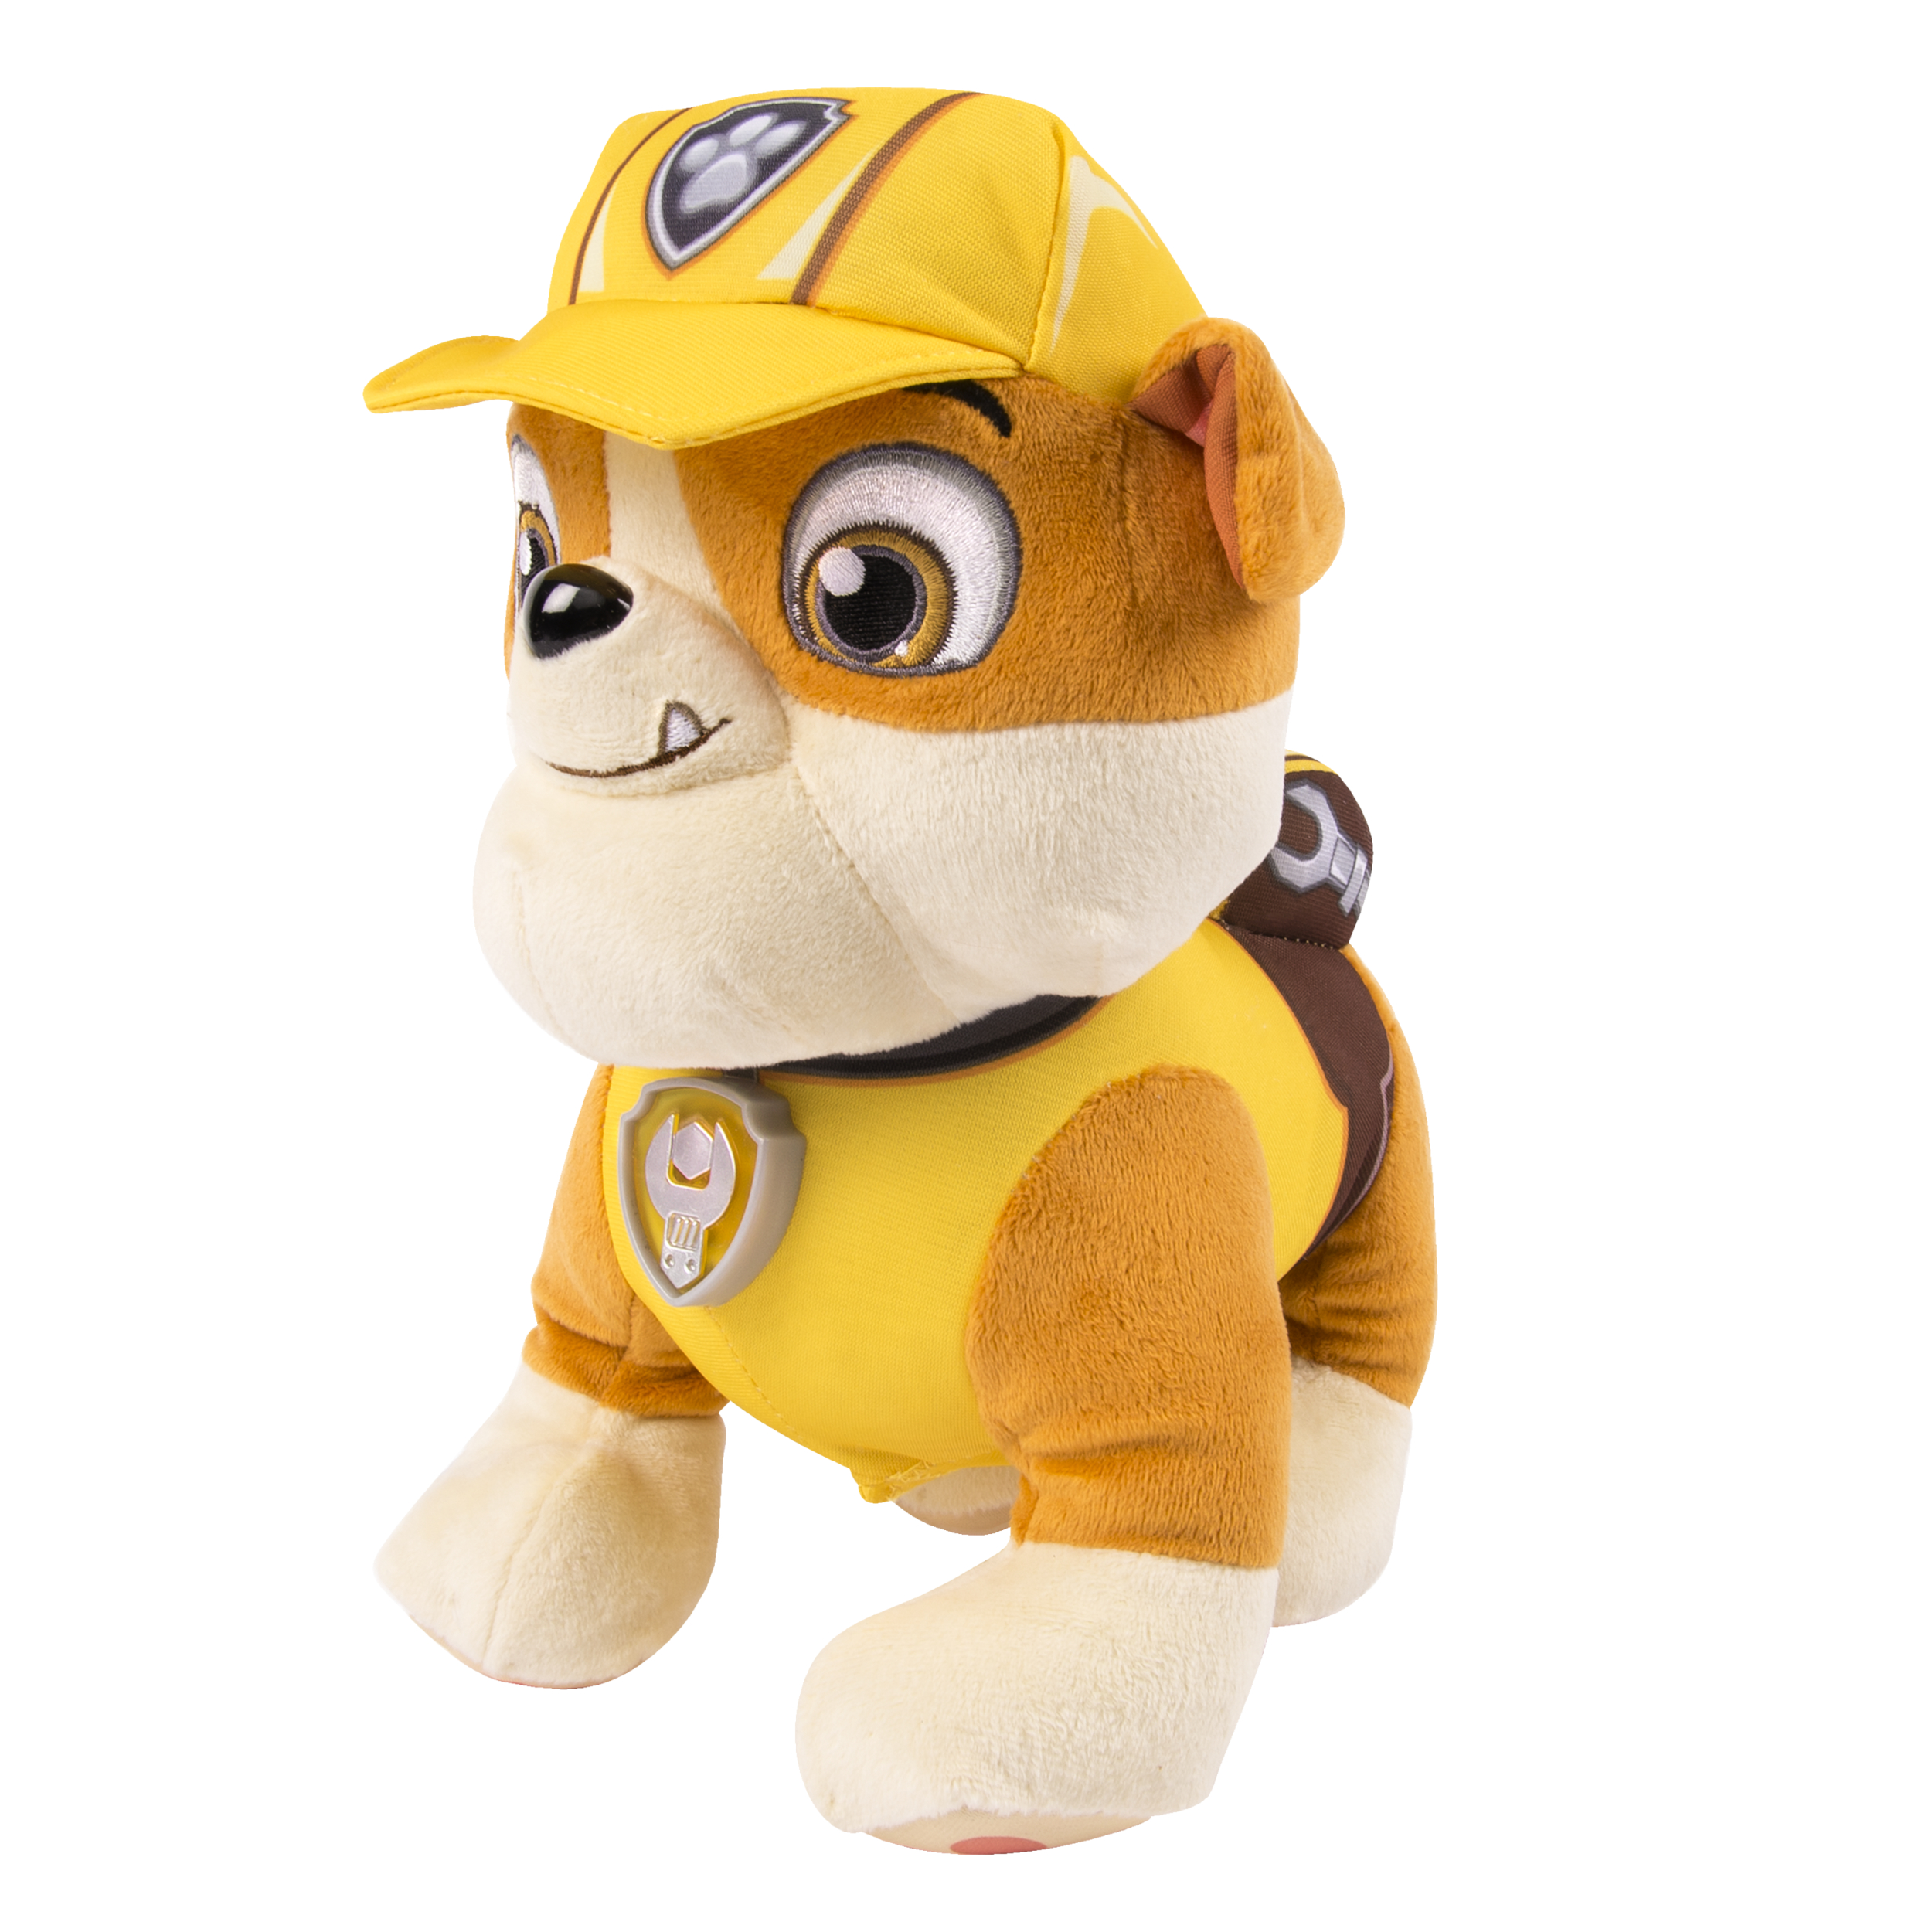 Paw Patrol Deluxe Lights and Sounds Plush, Real Talking Rubble - image 2 of 5